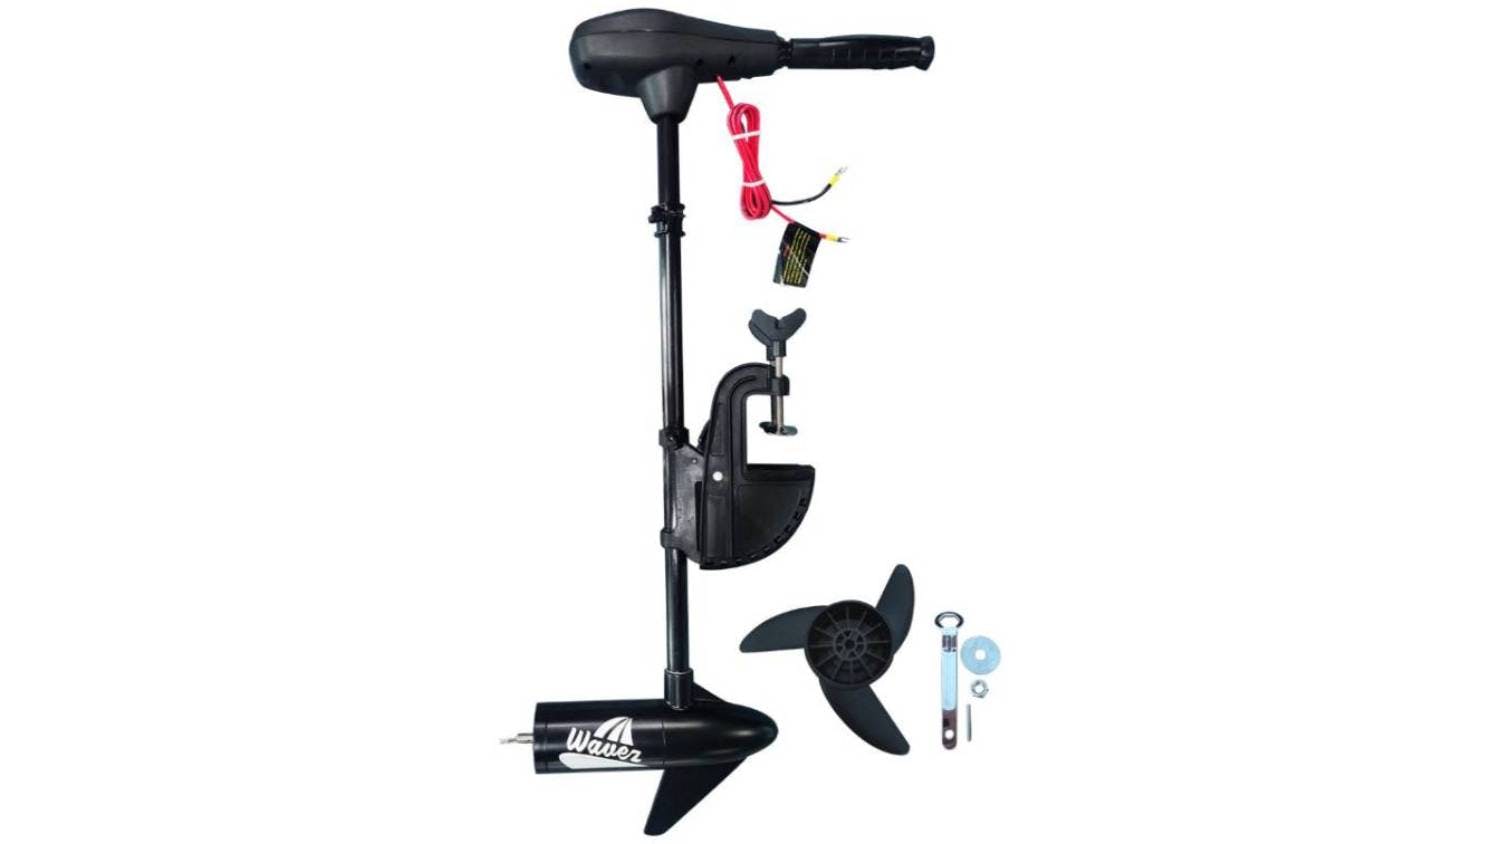 TSB Living Electric Trolling Outboard Motor